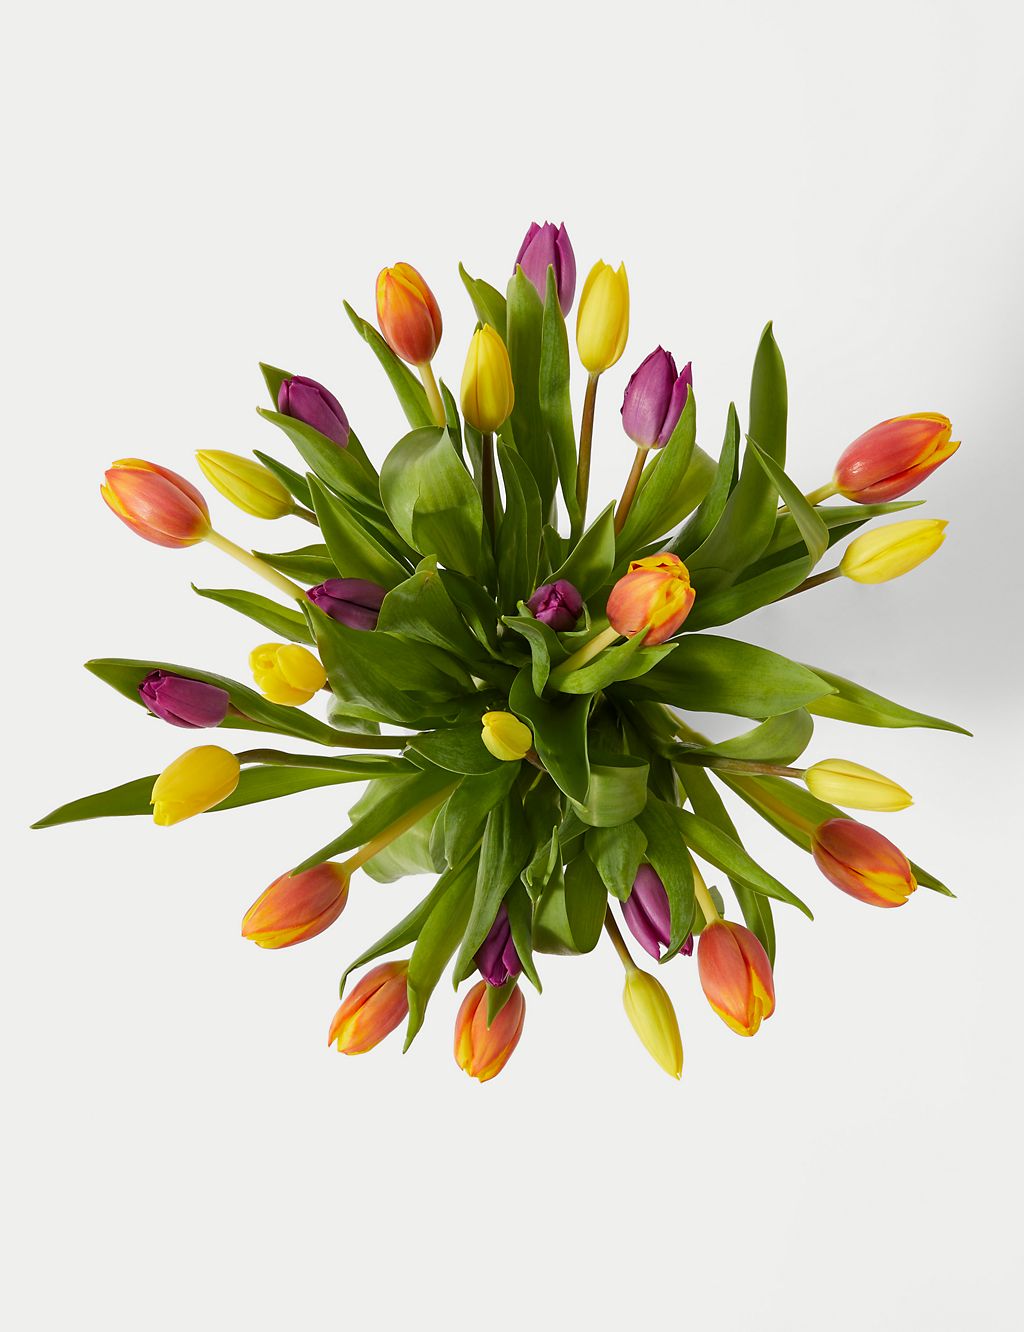 Bright & Beautiful Tulip Bouquet with Prosecco 1 of 6